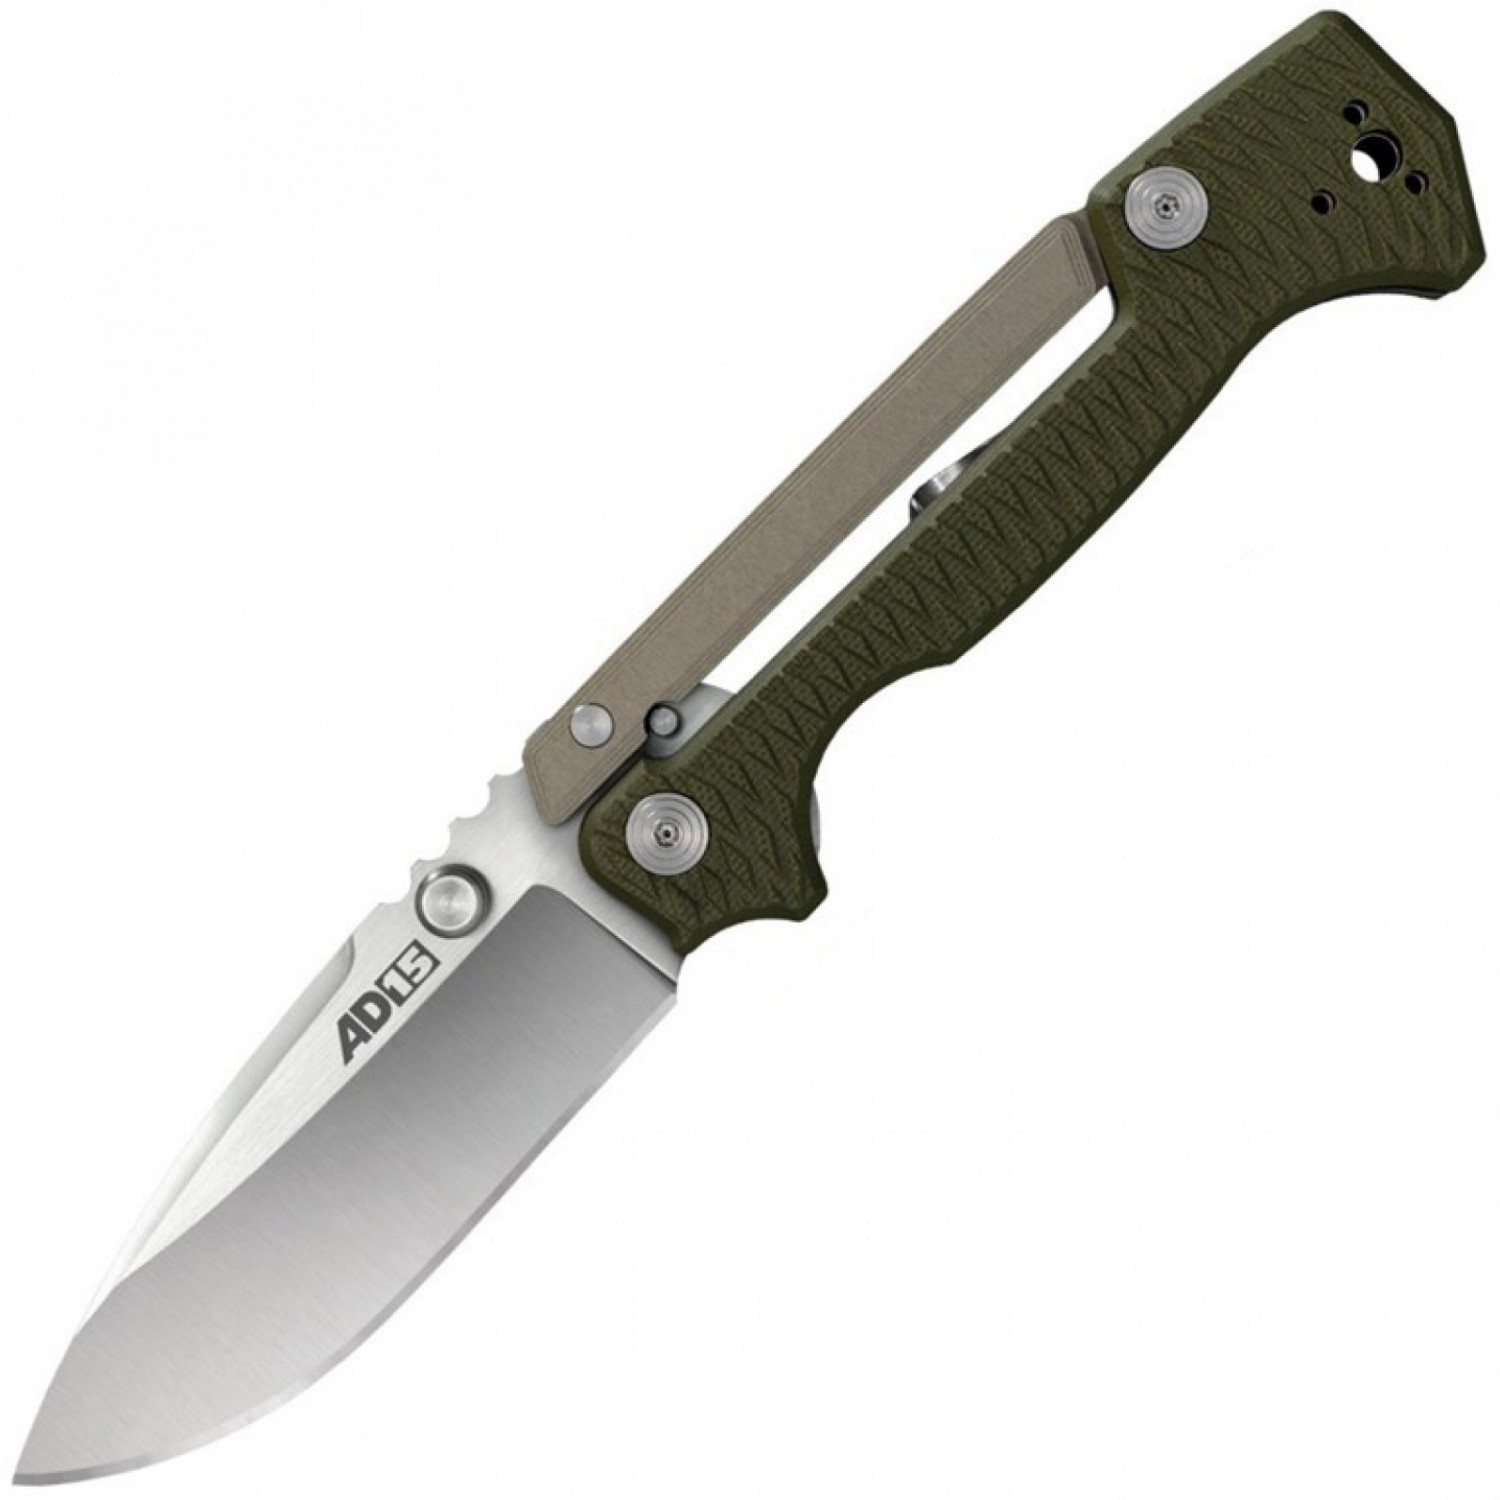   AD-15 Cold Steel 58SQ,  CPM-S35VN,  G-10